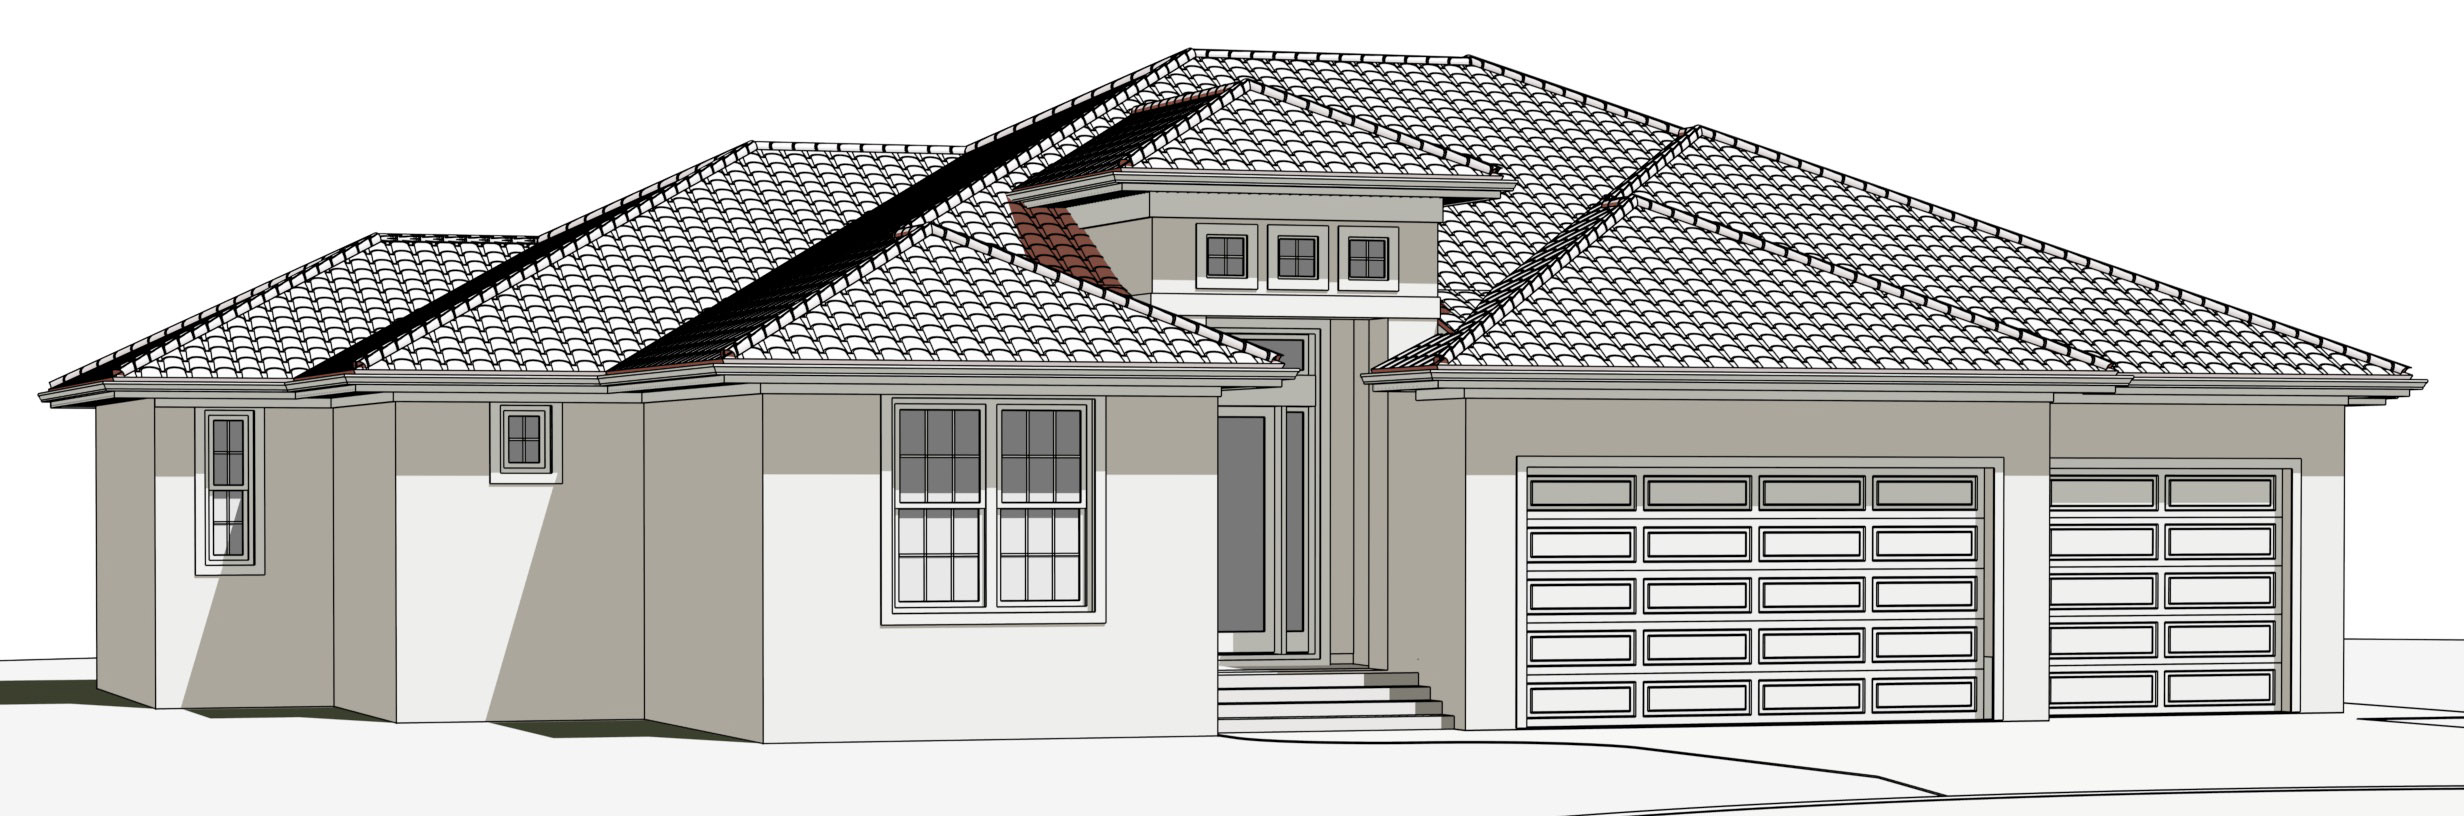 Punta Gorda Luxury Home Plan Front Elevation Viewed From Left